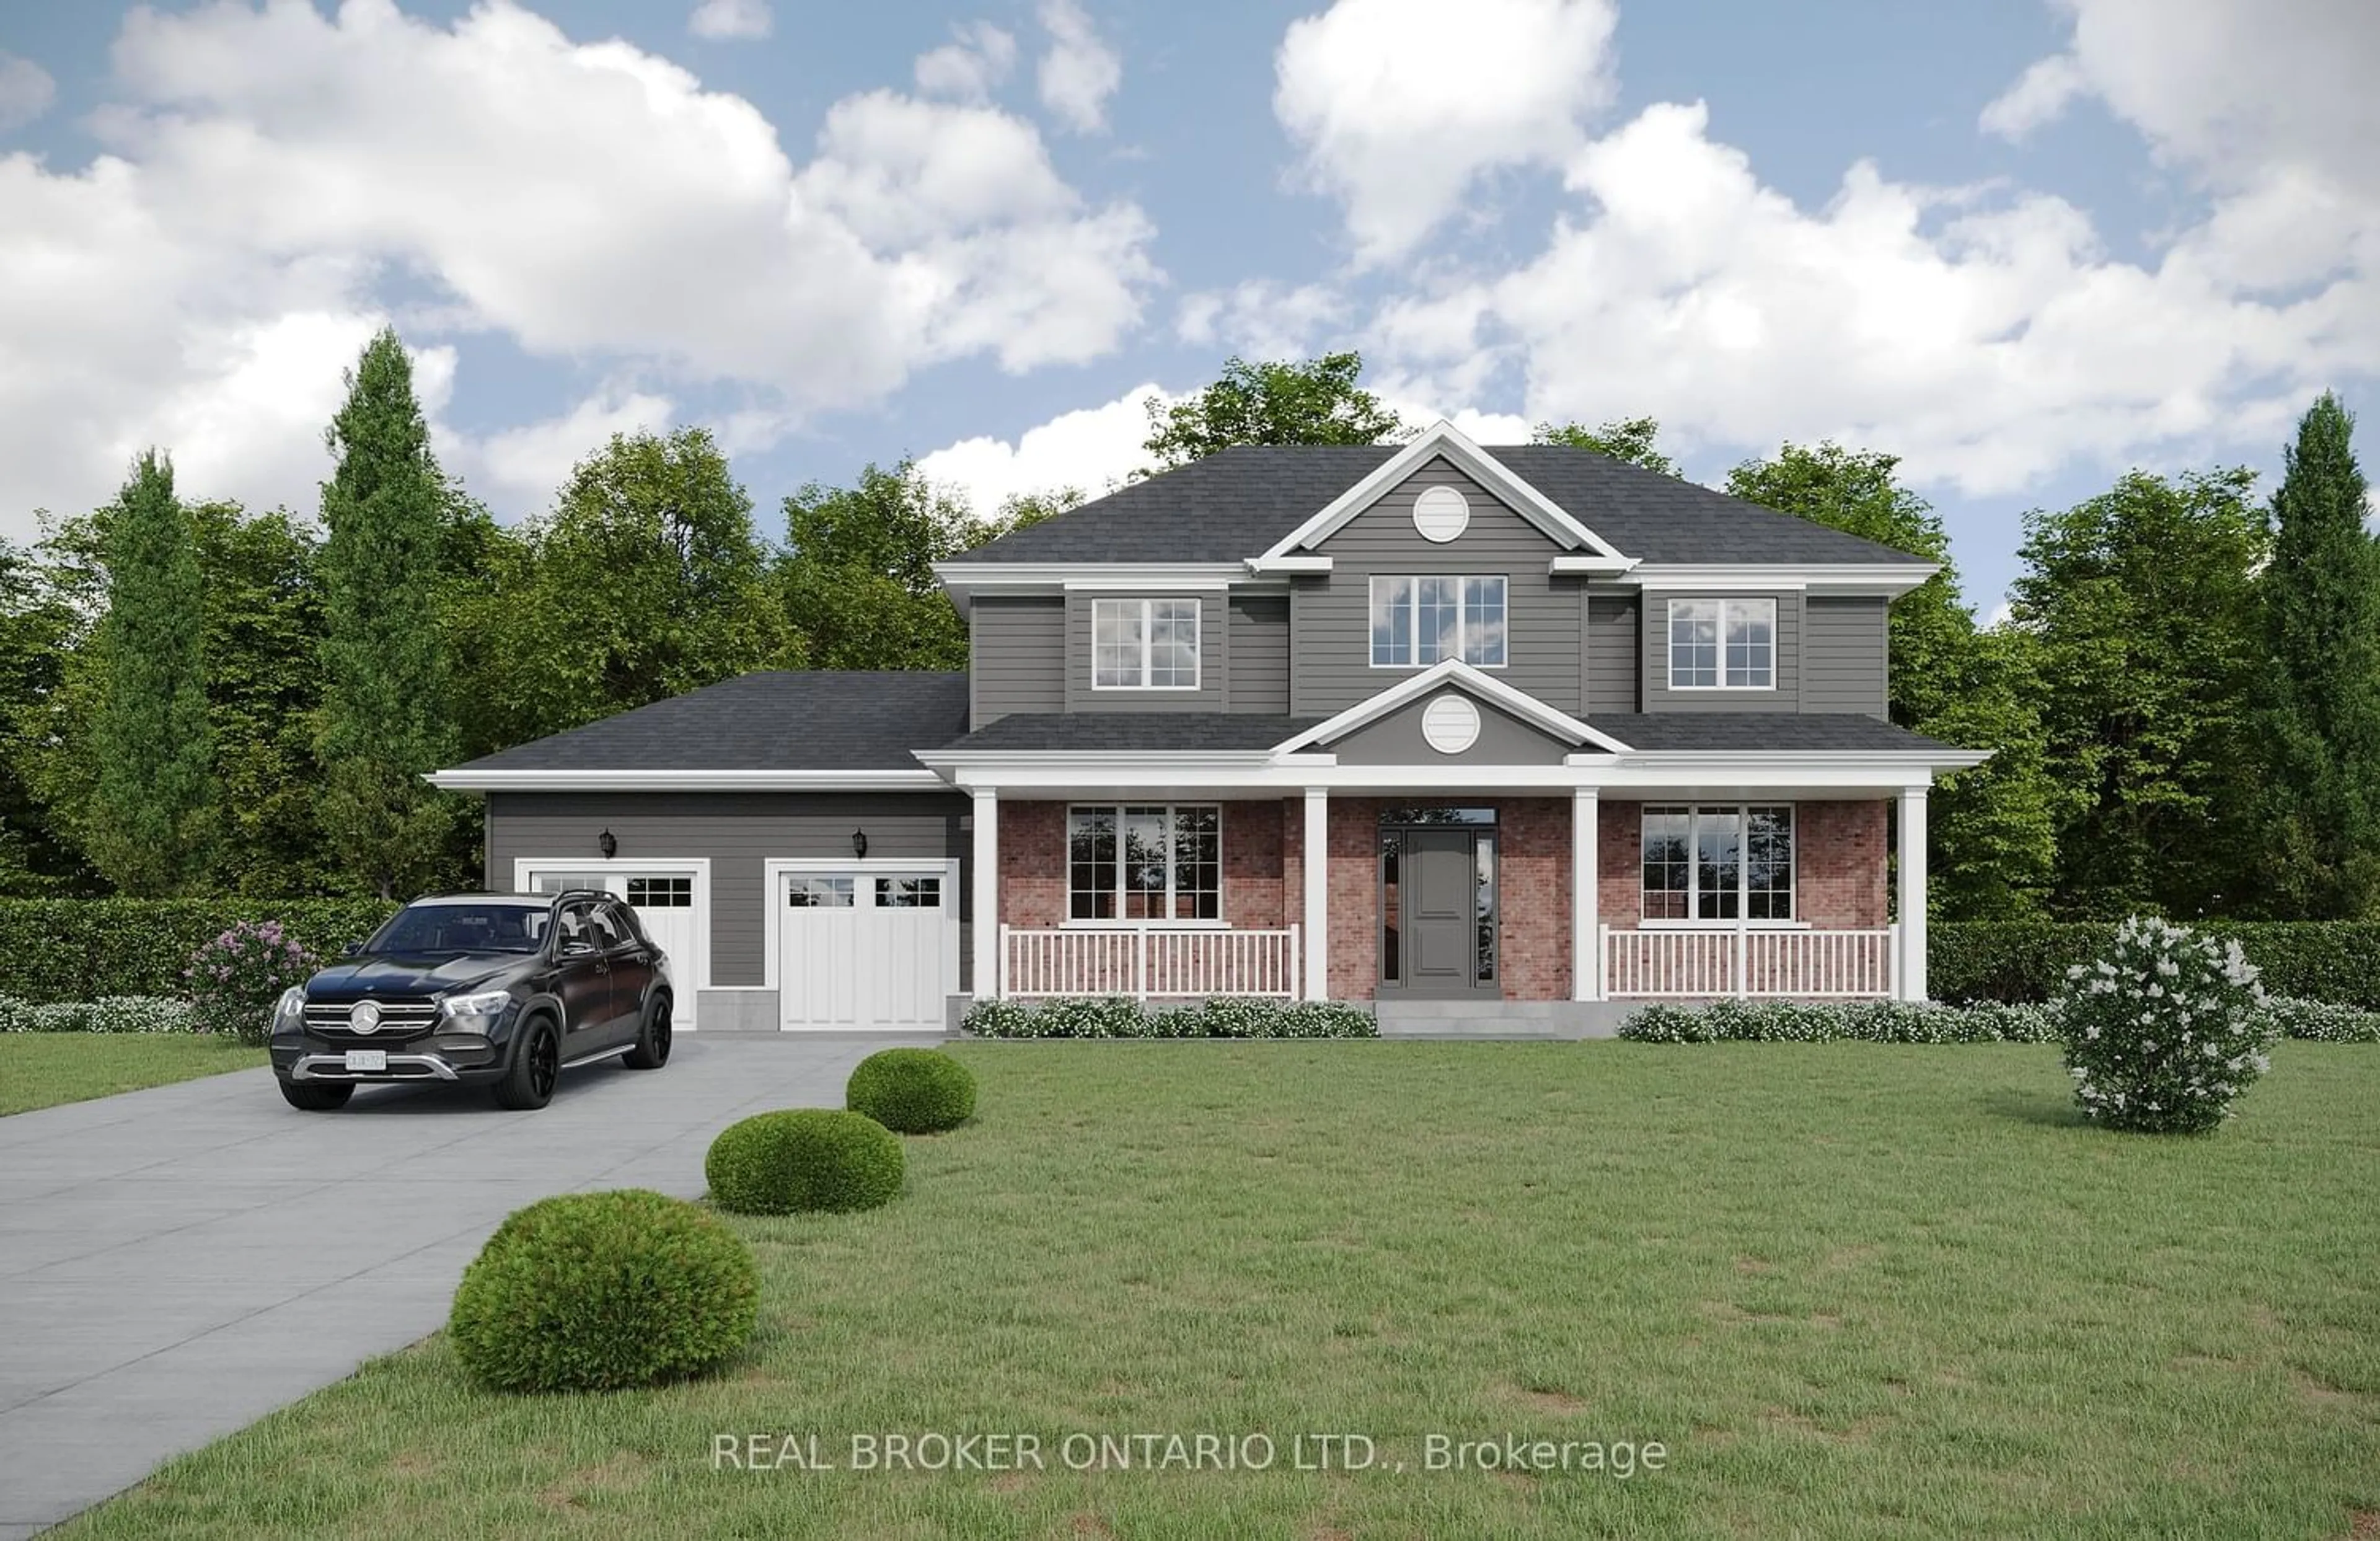 Home with brick exterior material for 51 Wildan Dr, Hamilton Ontario L8N 2Z7